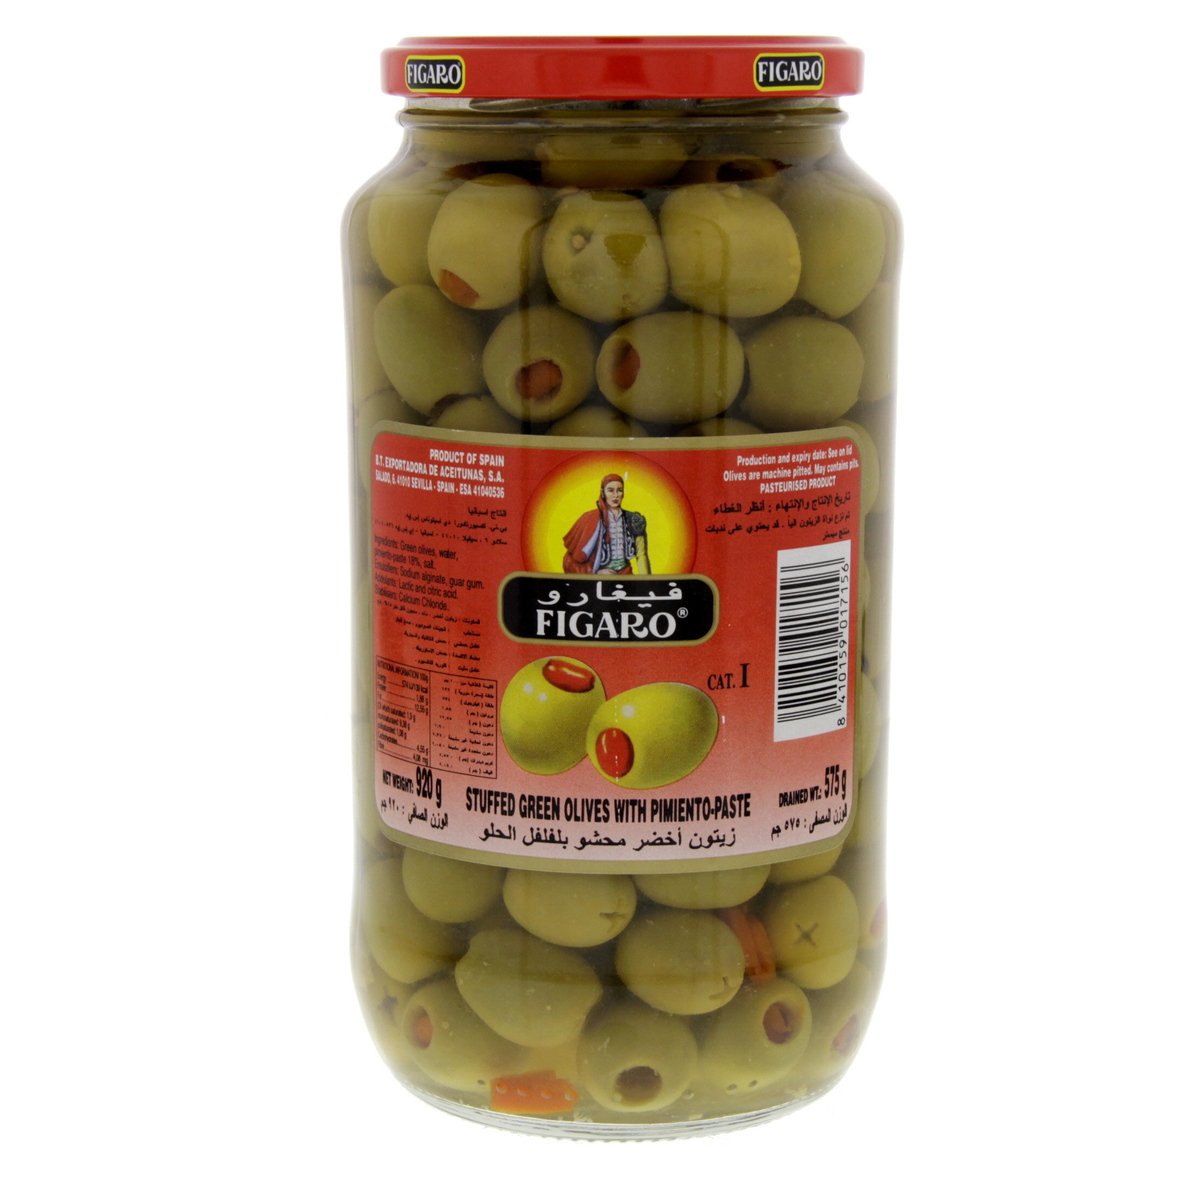 Figaro Stuffed Green Olives With Pimiento-Paste 575 g